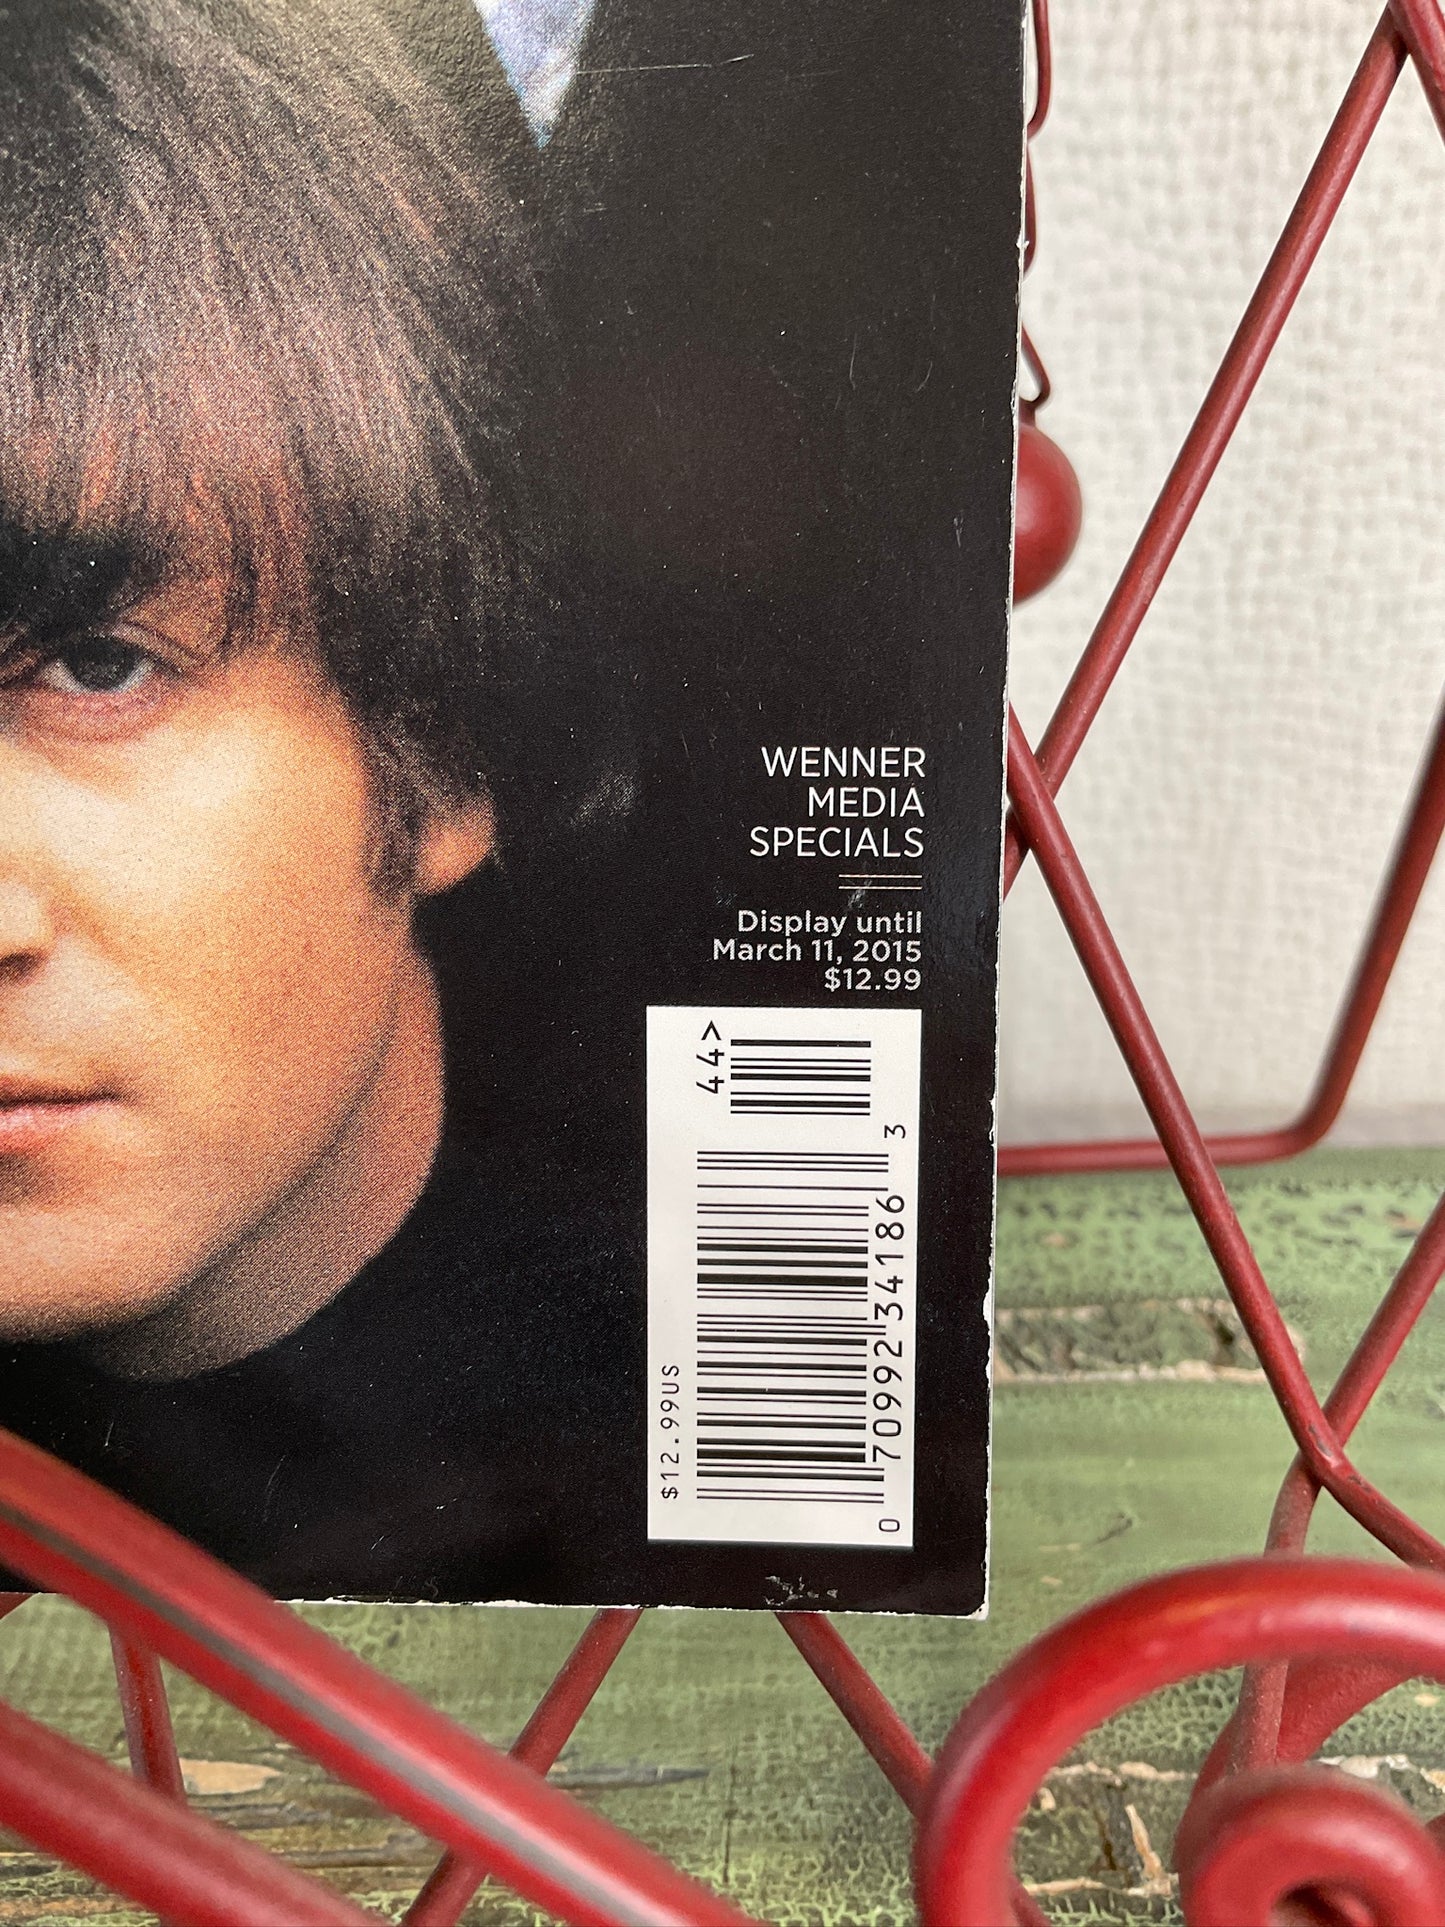 Assorted Beatle Magazines & Books, Sold Separately